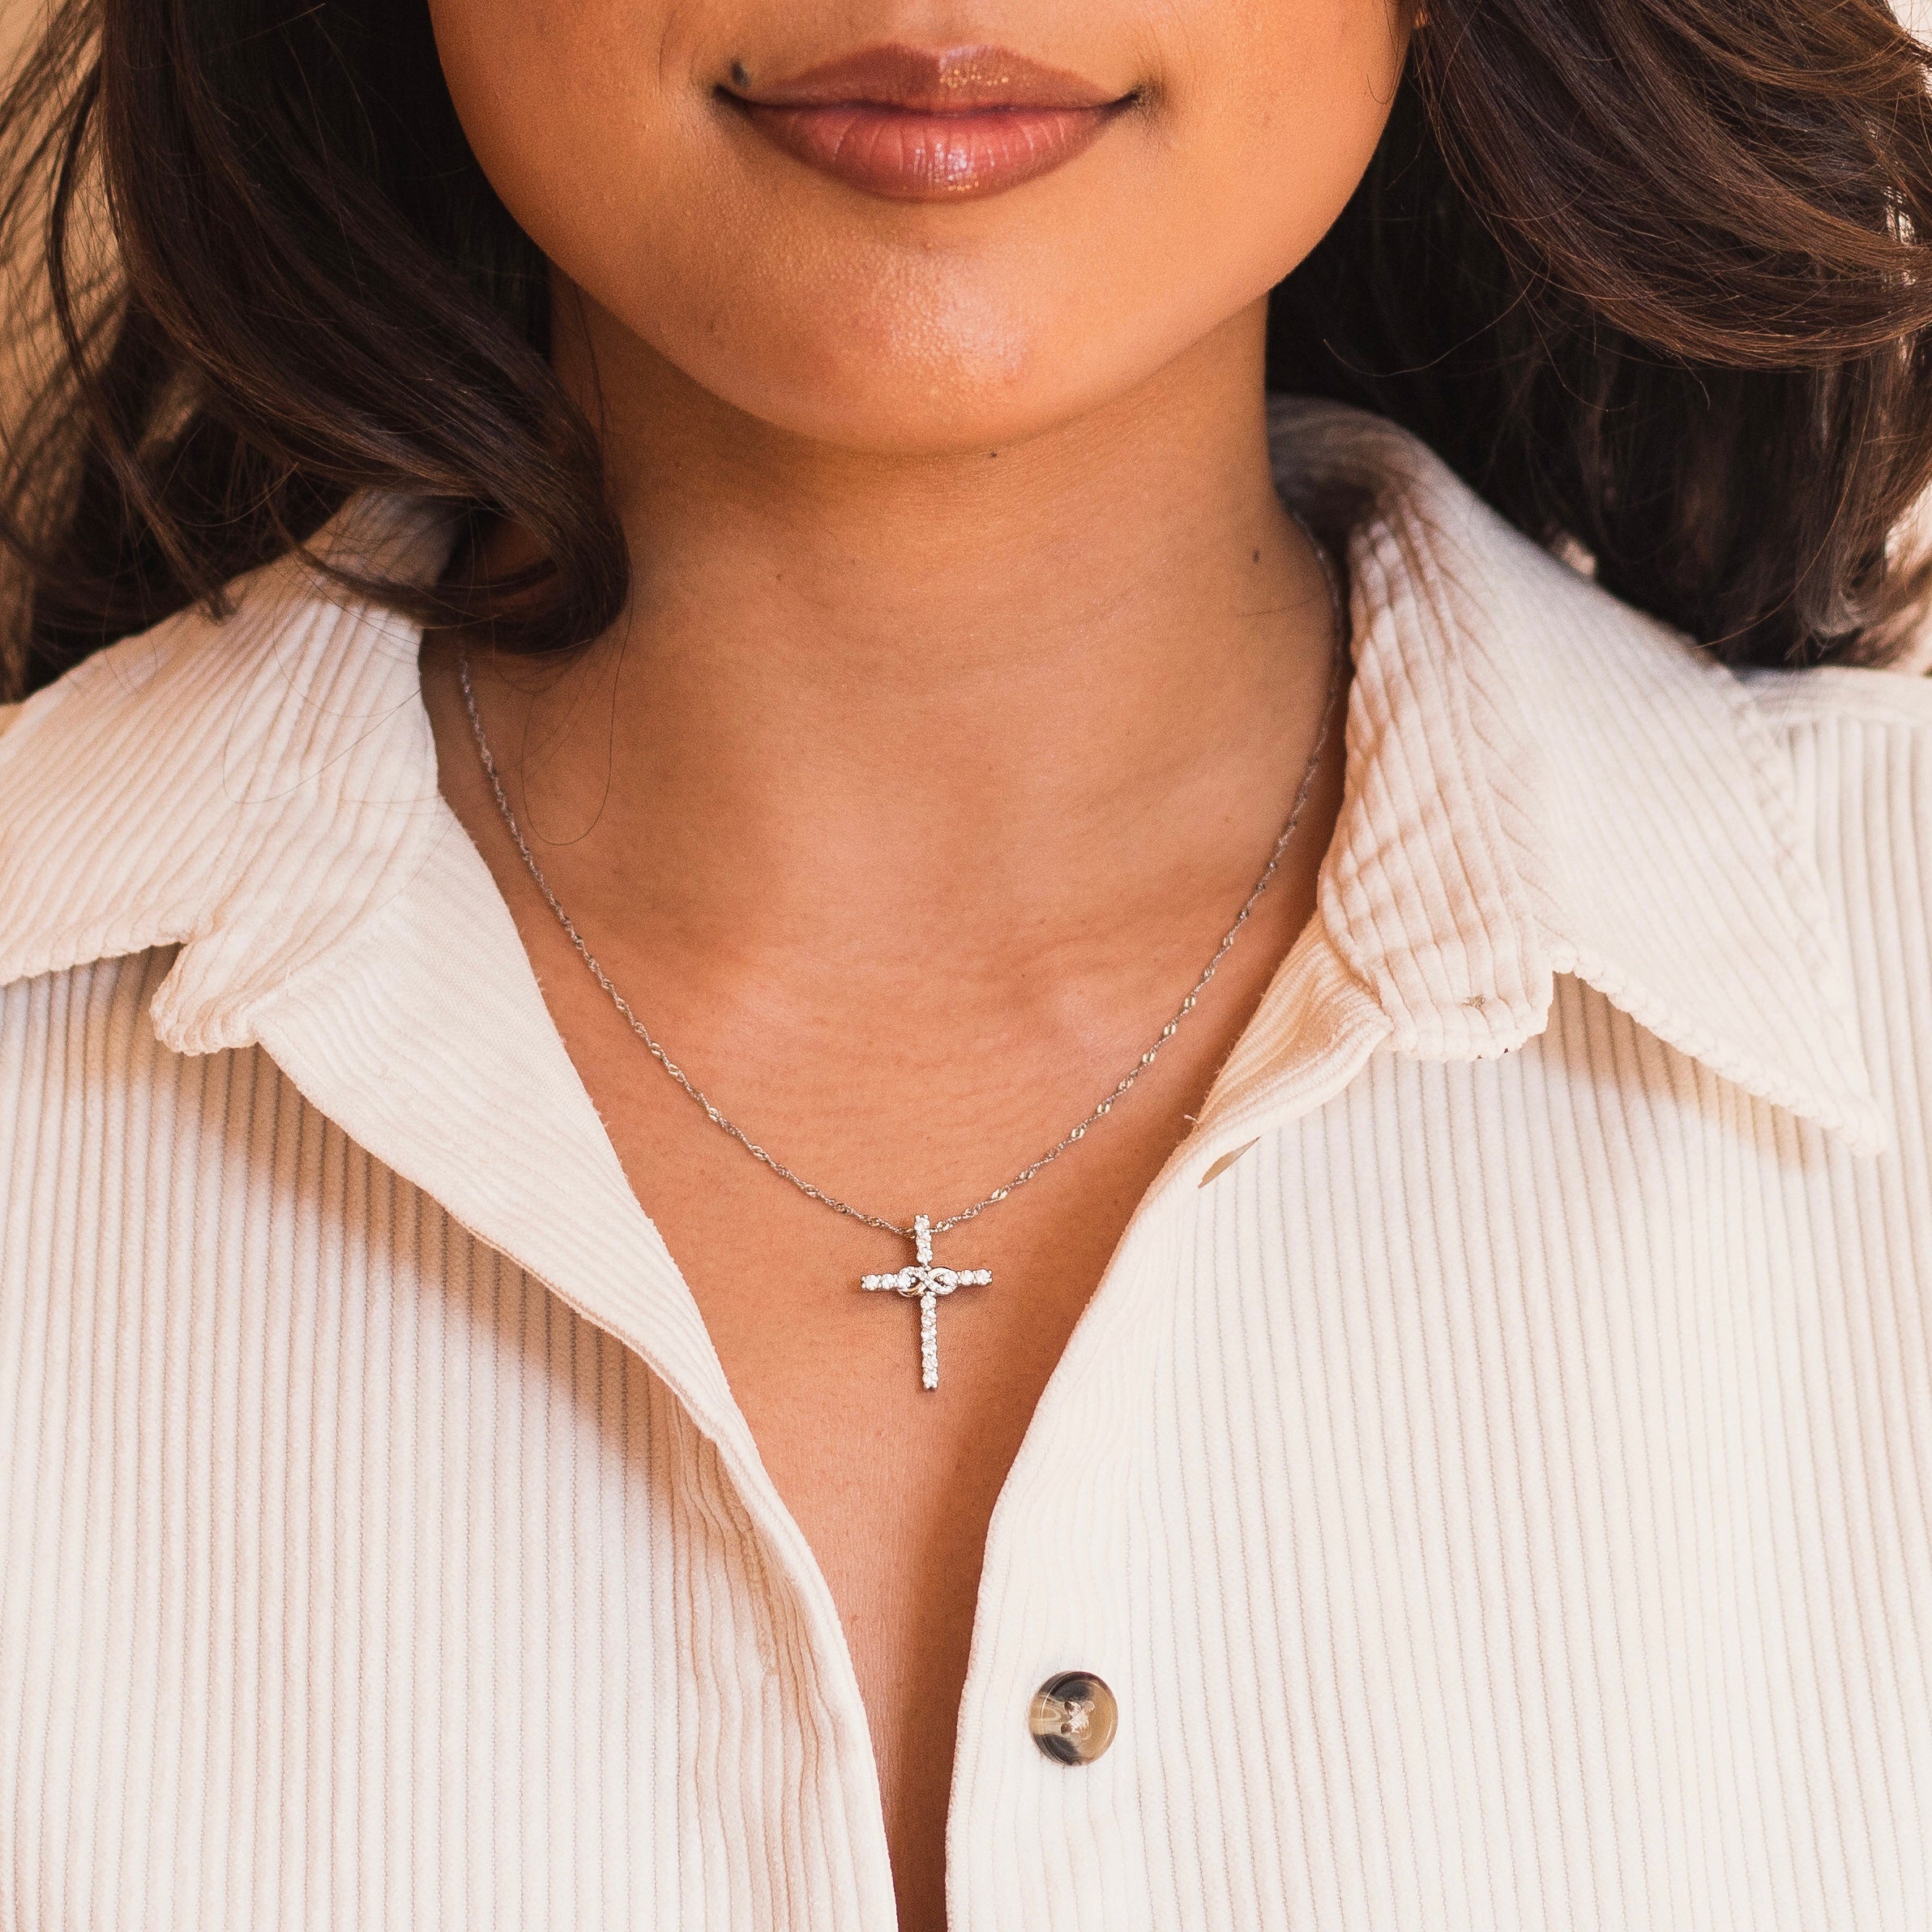 Anastasia Sterling Silver Cross Necklace with Infinity Symbol 